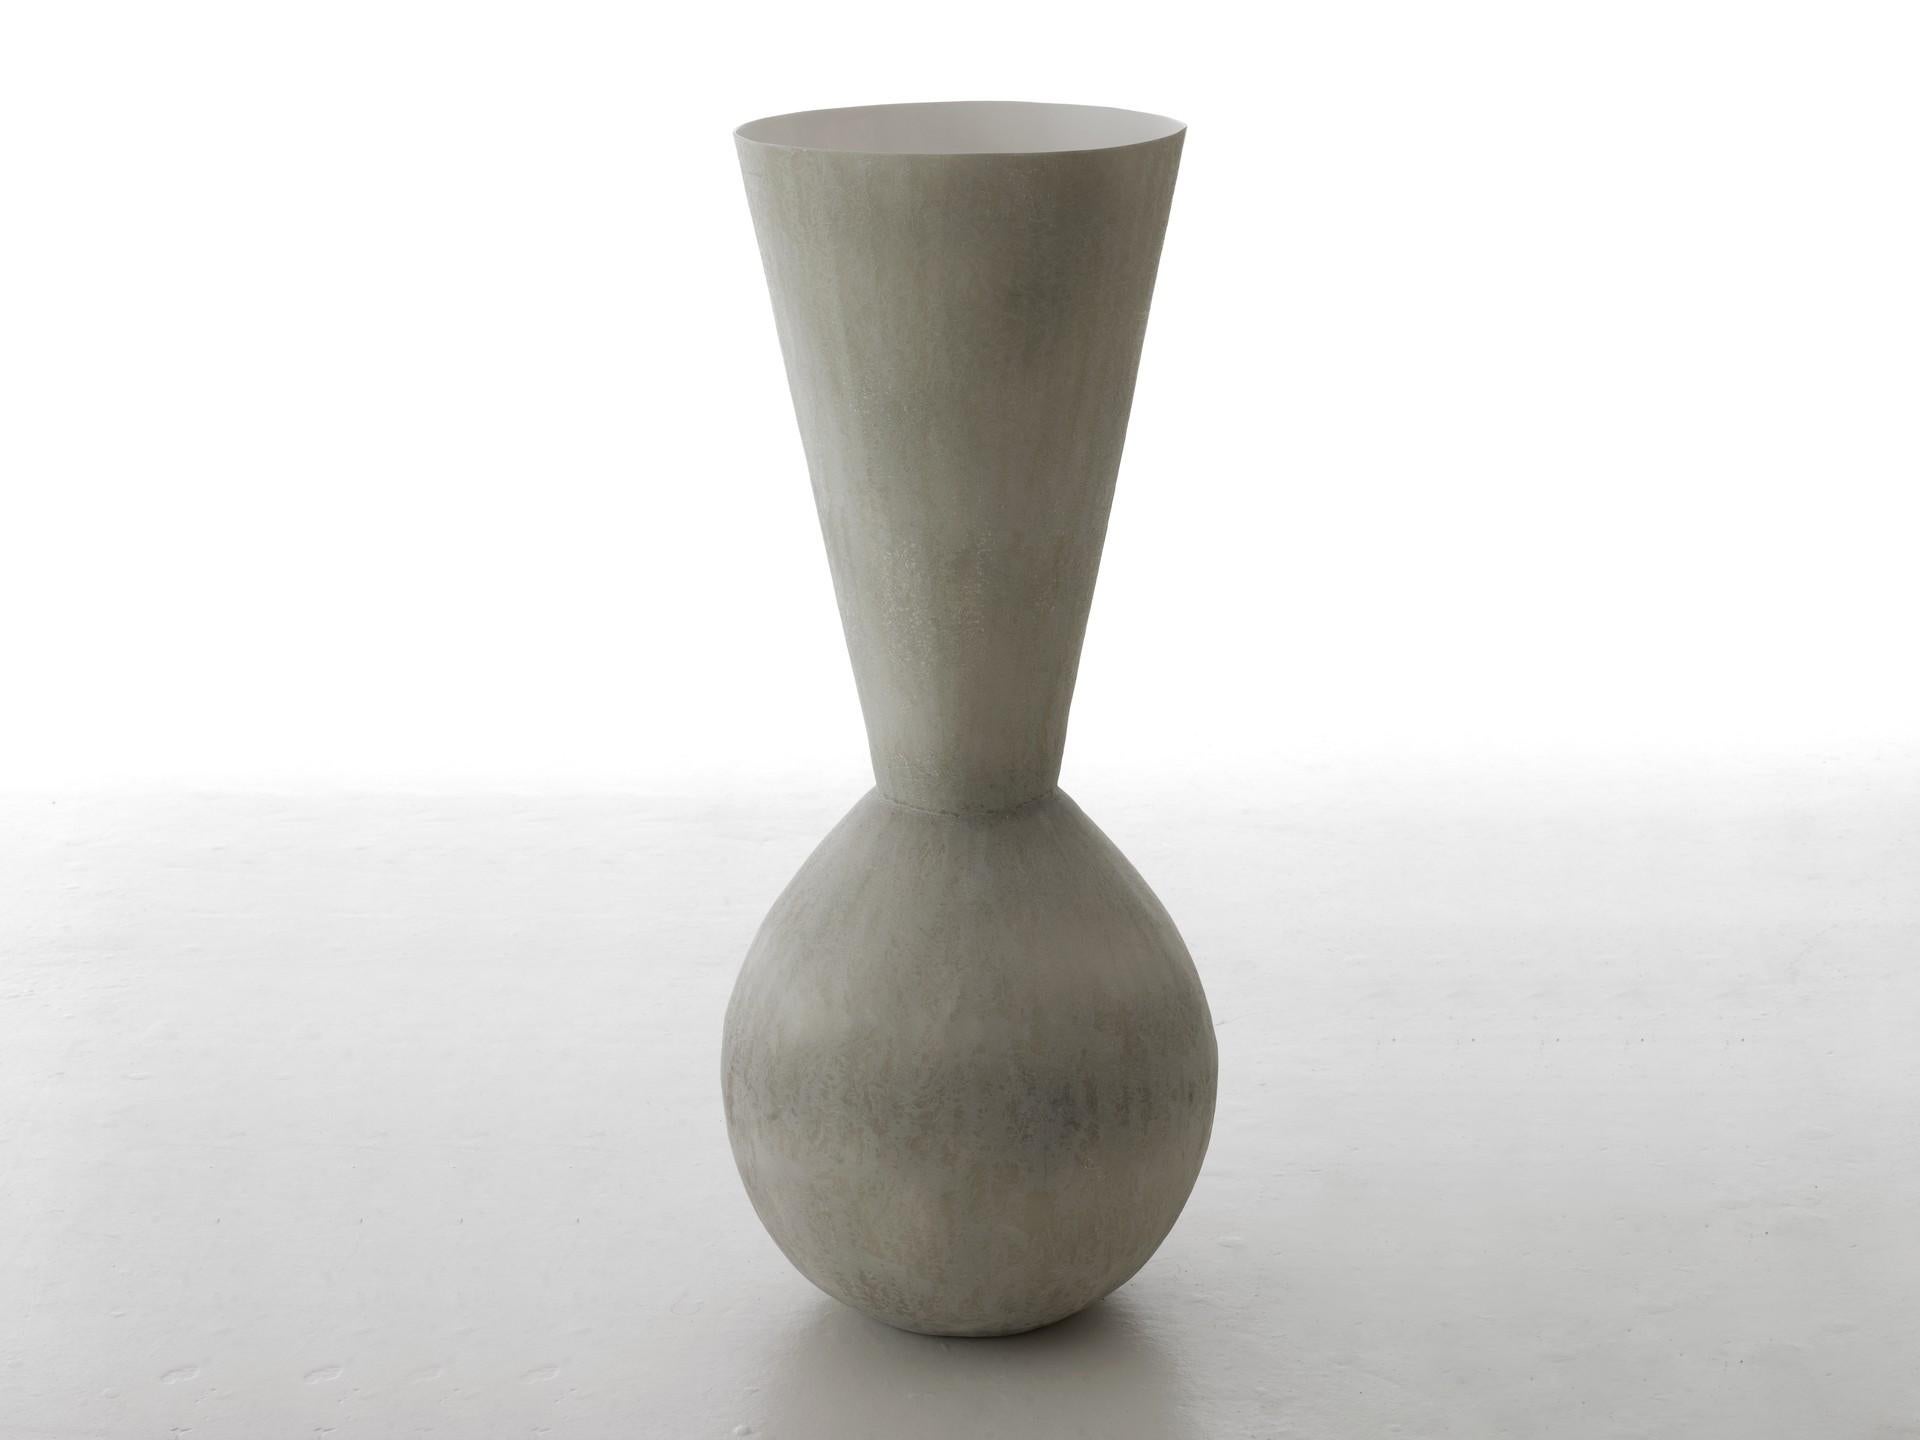 Koneo vase by Imperfettolab
Dimensions: Ø 47 x H 120 cm
Materials: Raw material


Imperfetto lab
Who we are ? We are a family.
Verter Turroni, Emanuela Ravelli and our children Elia, Margherita and Eusebio.
All together, we are separate parts and